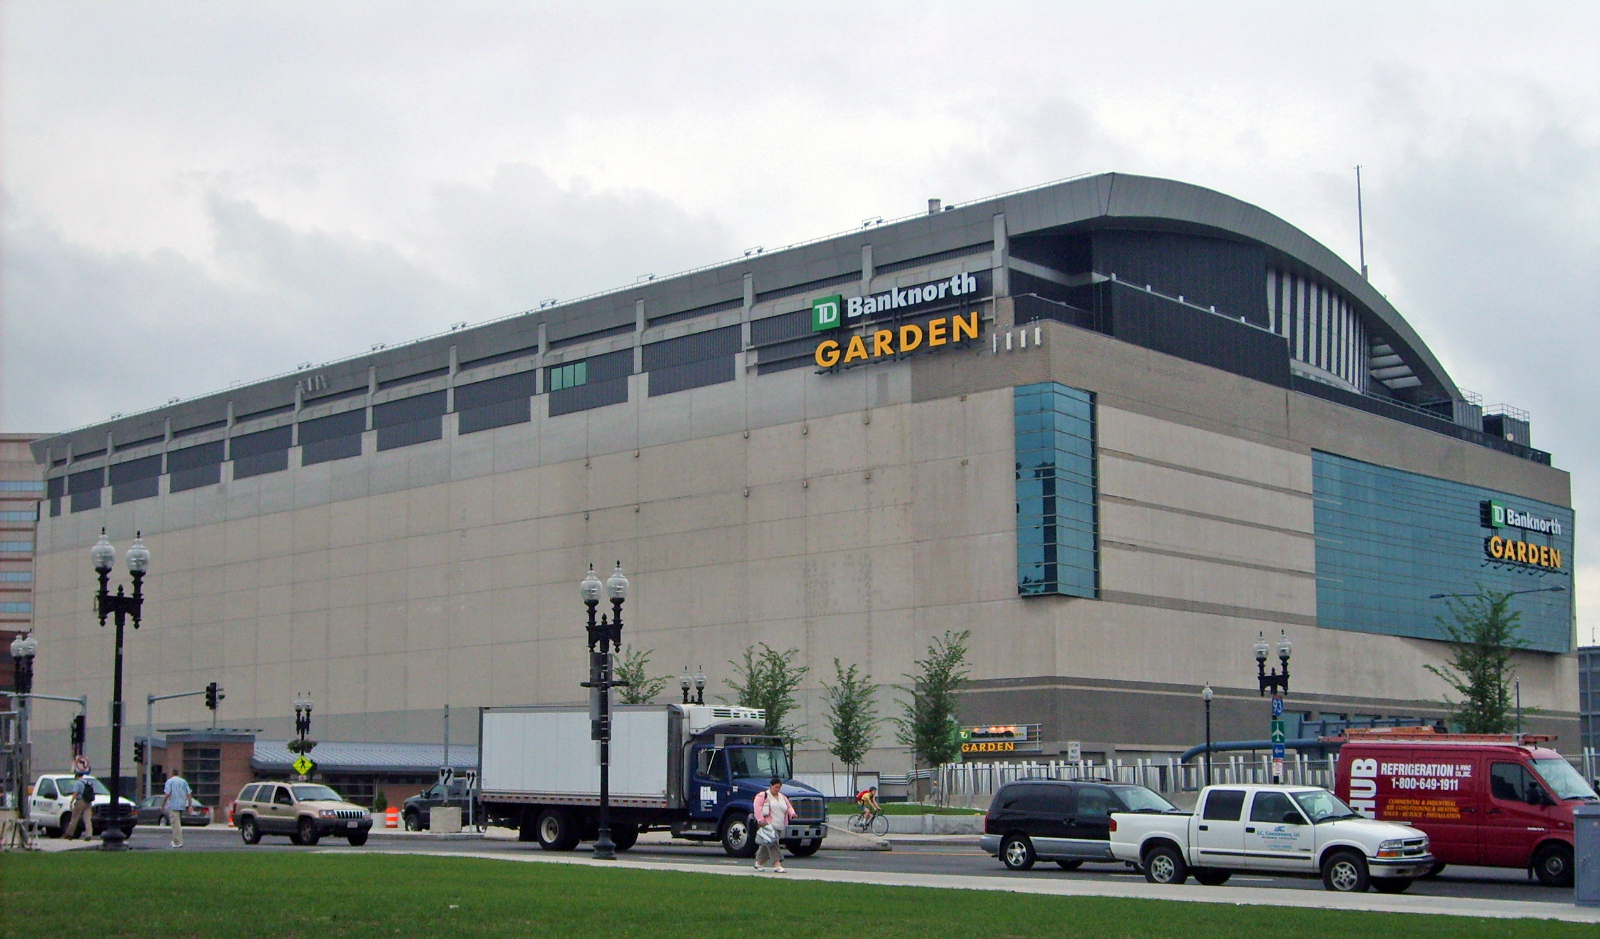 Boston Garden, Boston, MA. Built 1928, demolished 1998, replaced with the  bland, soulless TD Garden. : r/Lost_Architecture